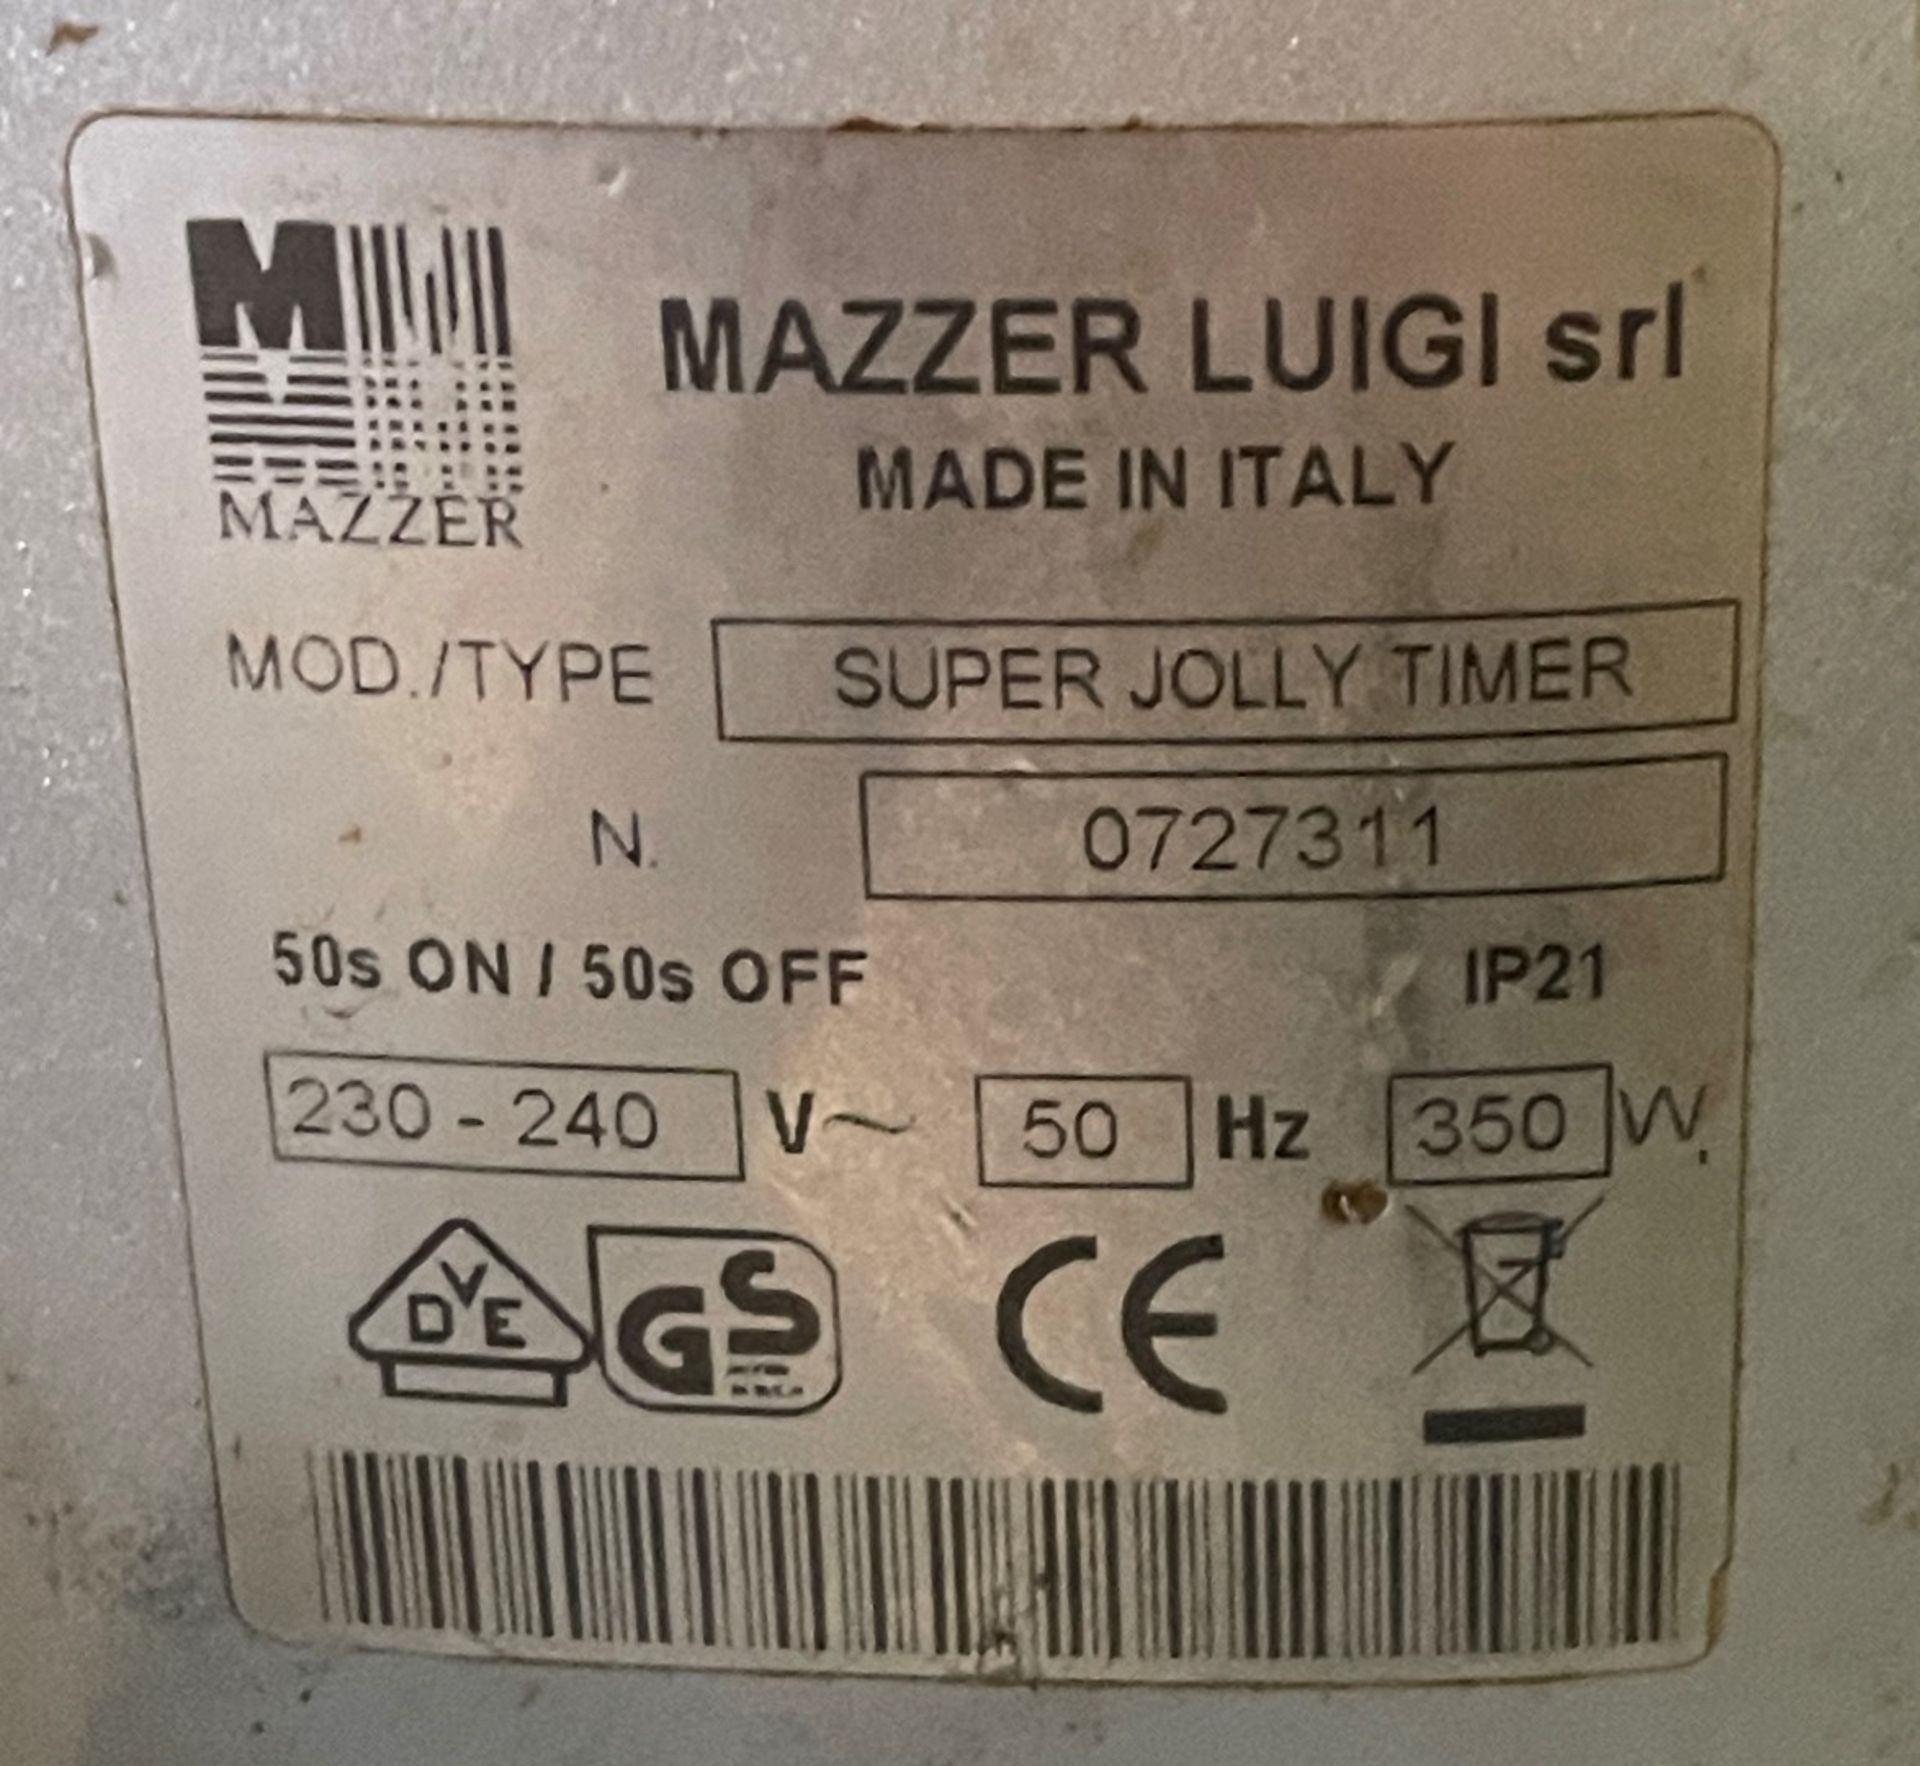 1 x Mazzer Luigi Super Jolly Timer Commercial Coffee Grinder - Image 6 of 8